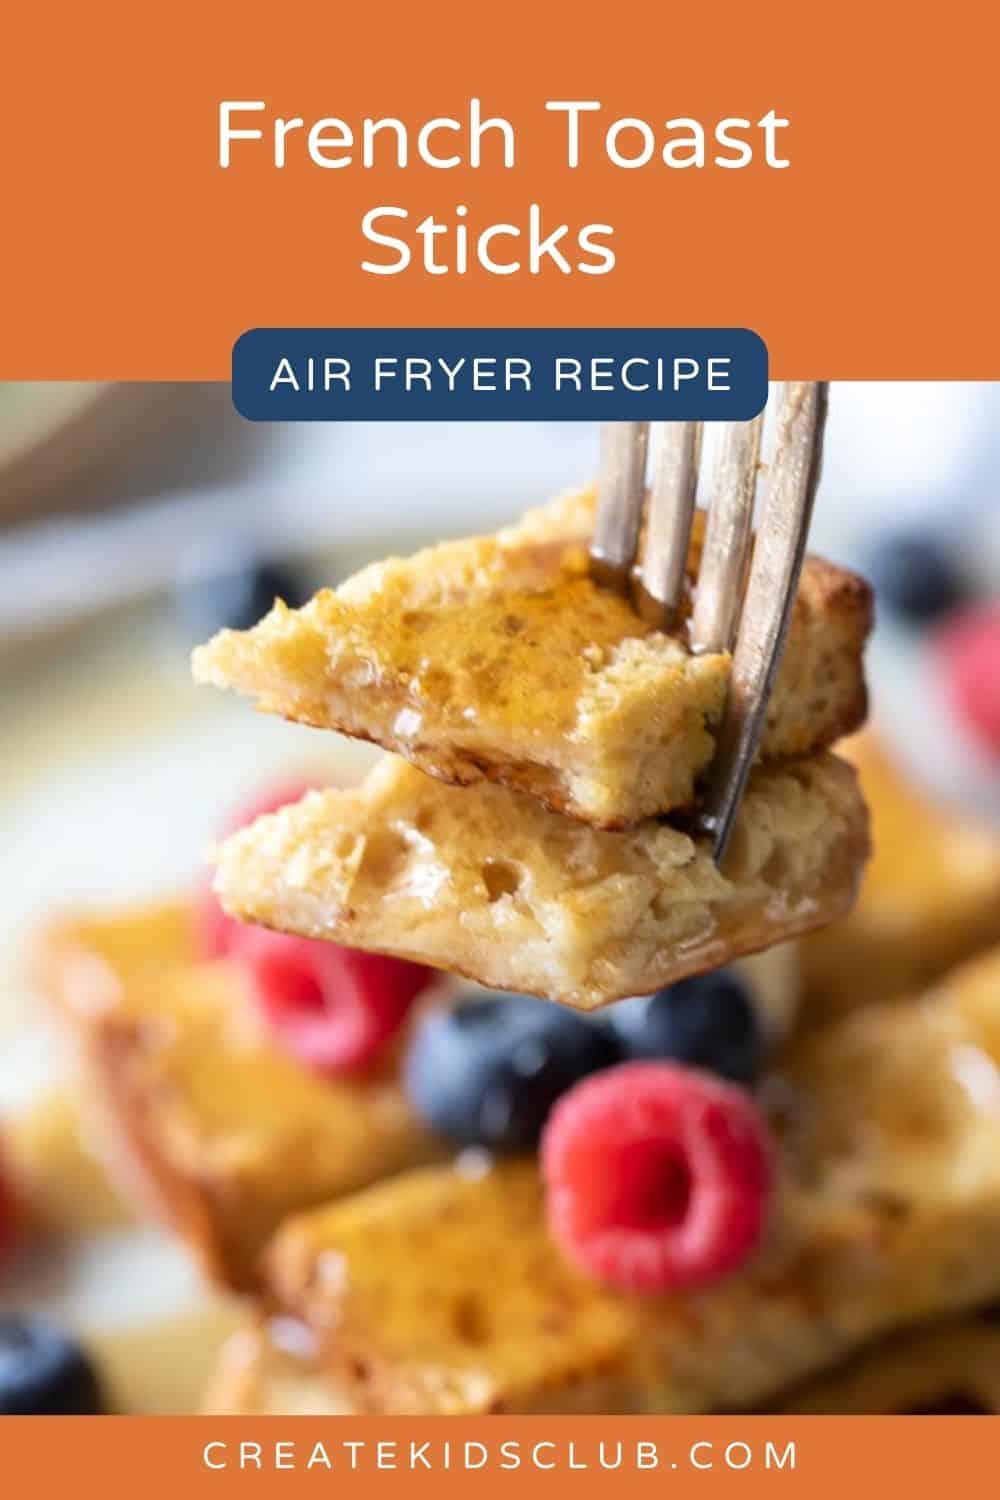 Pin of air fryer French toast with a fork taking a bite.